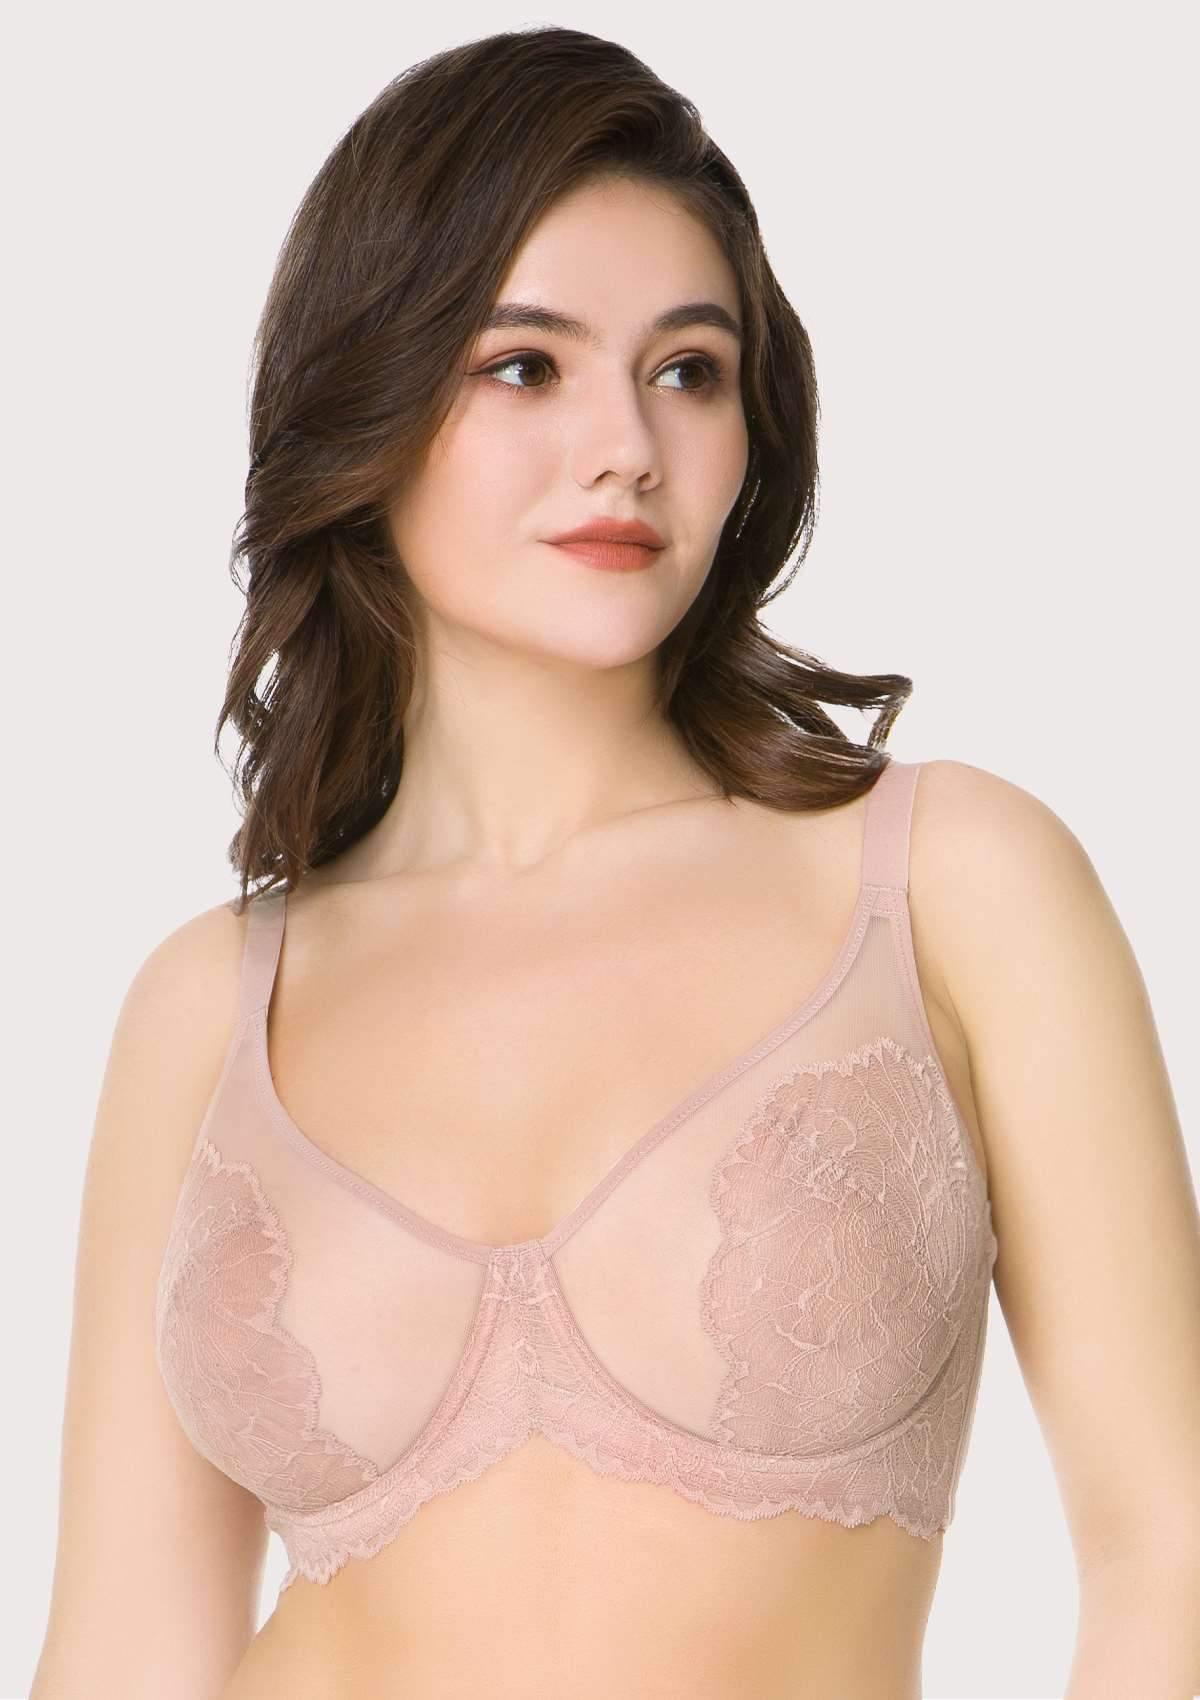 HSIA Blossom Lace Bra And Panties Set: Best Bra For Large Busts - Dark Pink / 34 / DDD/F